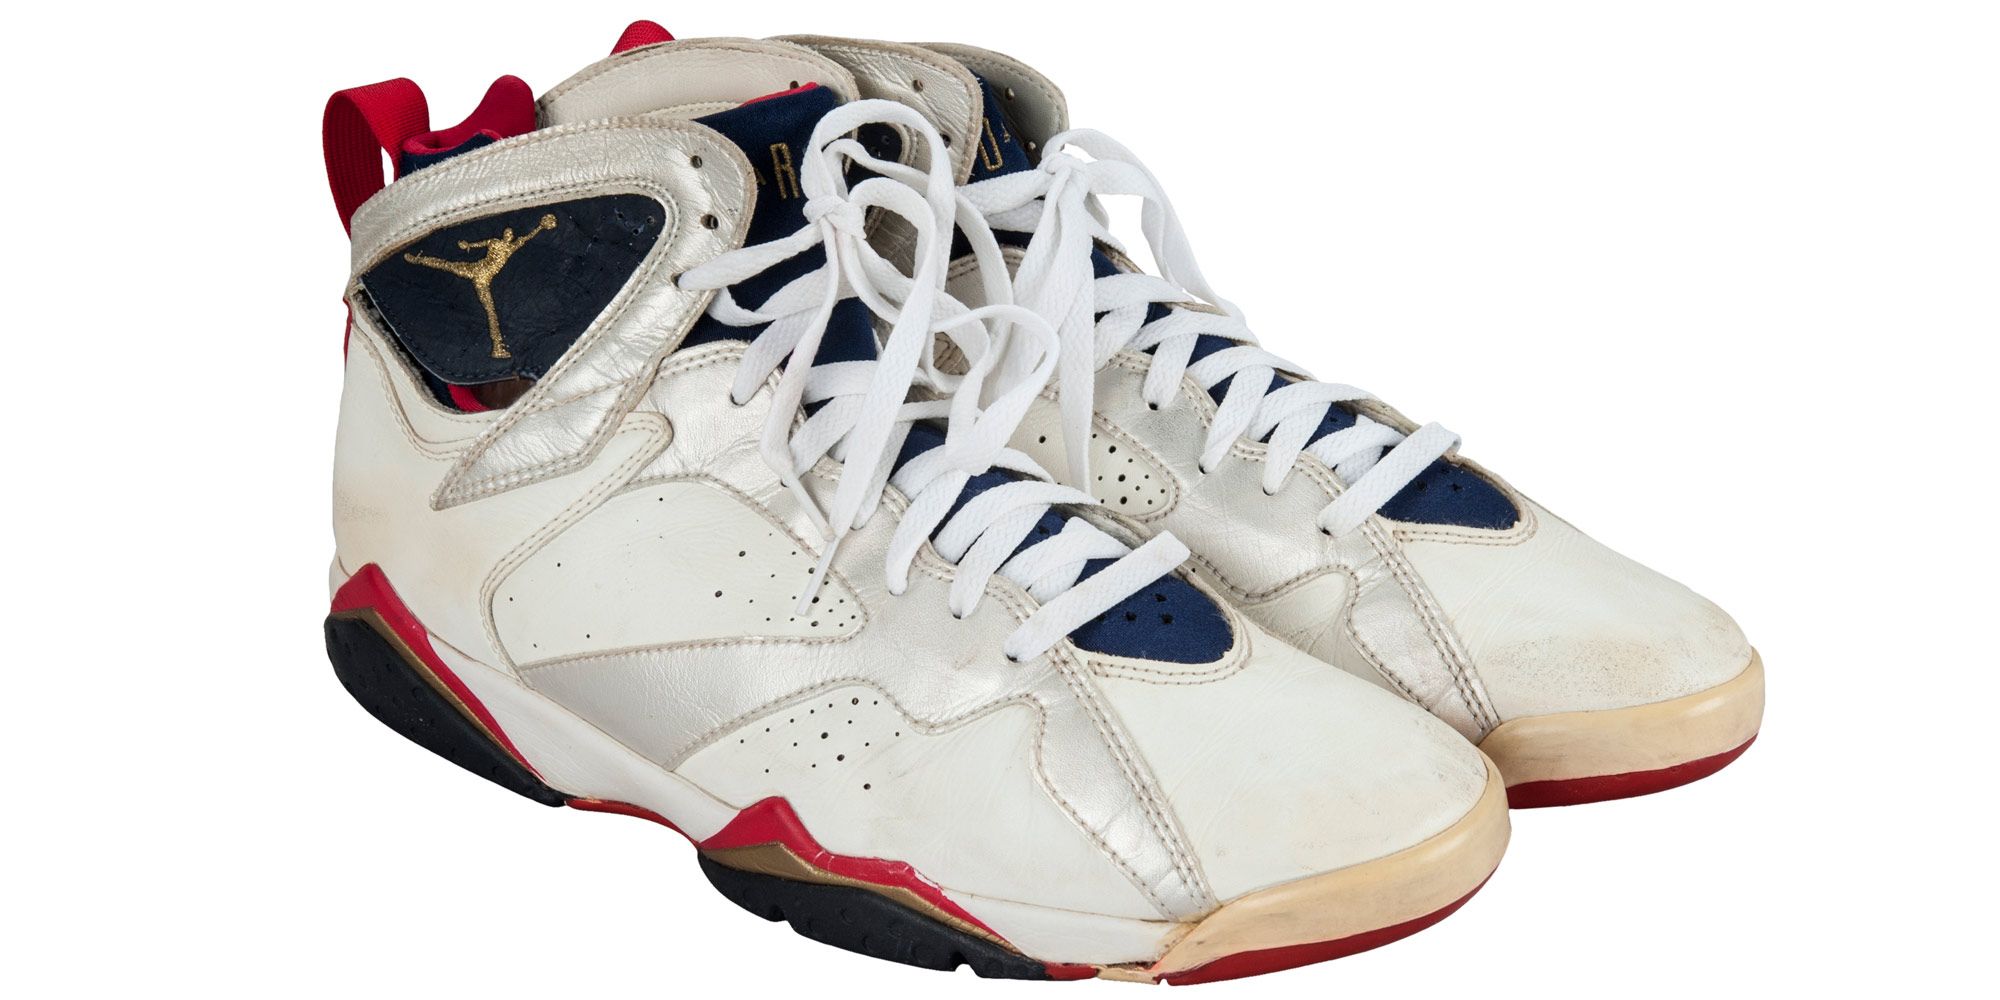 Jordan's Nikes From the '92 Dream Team Are For Auction